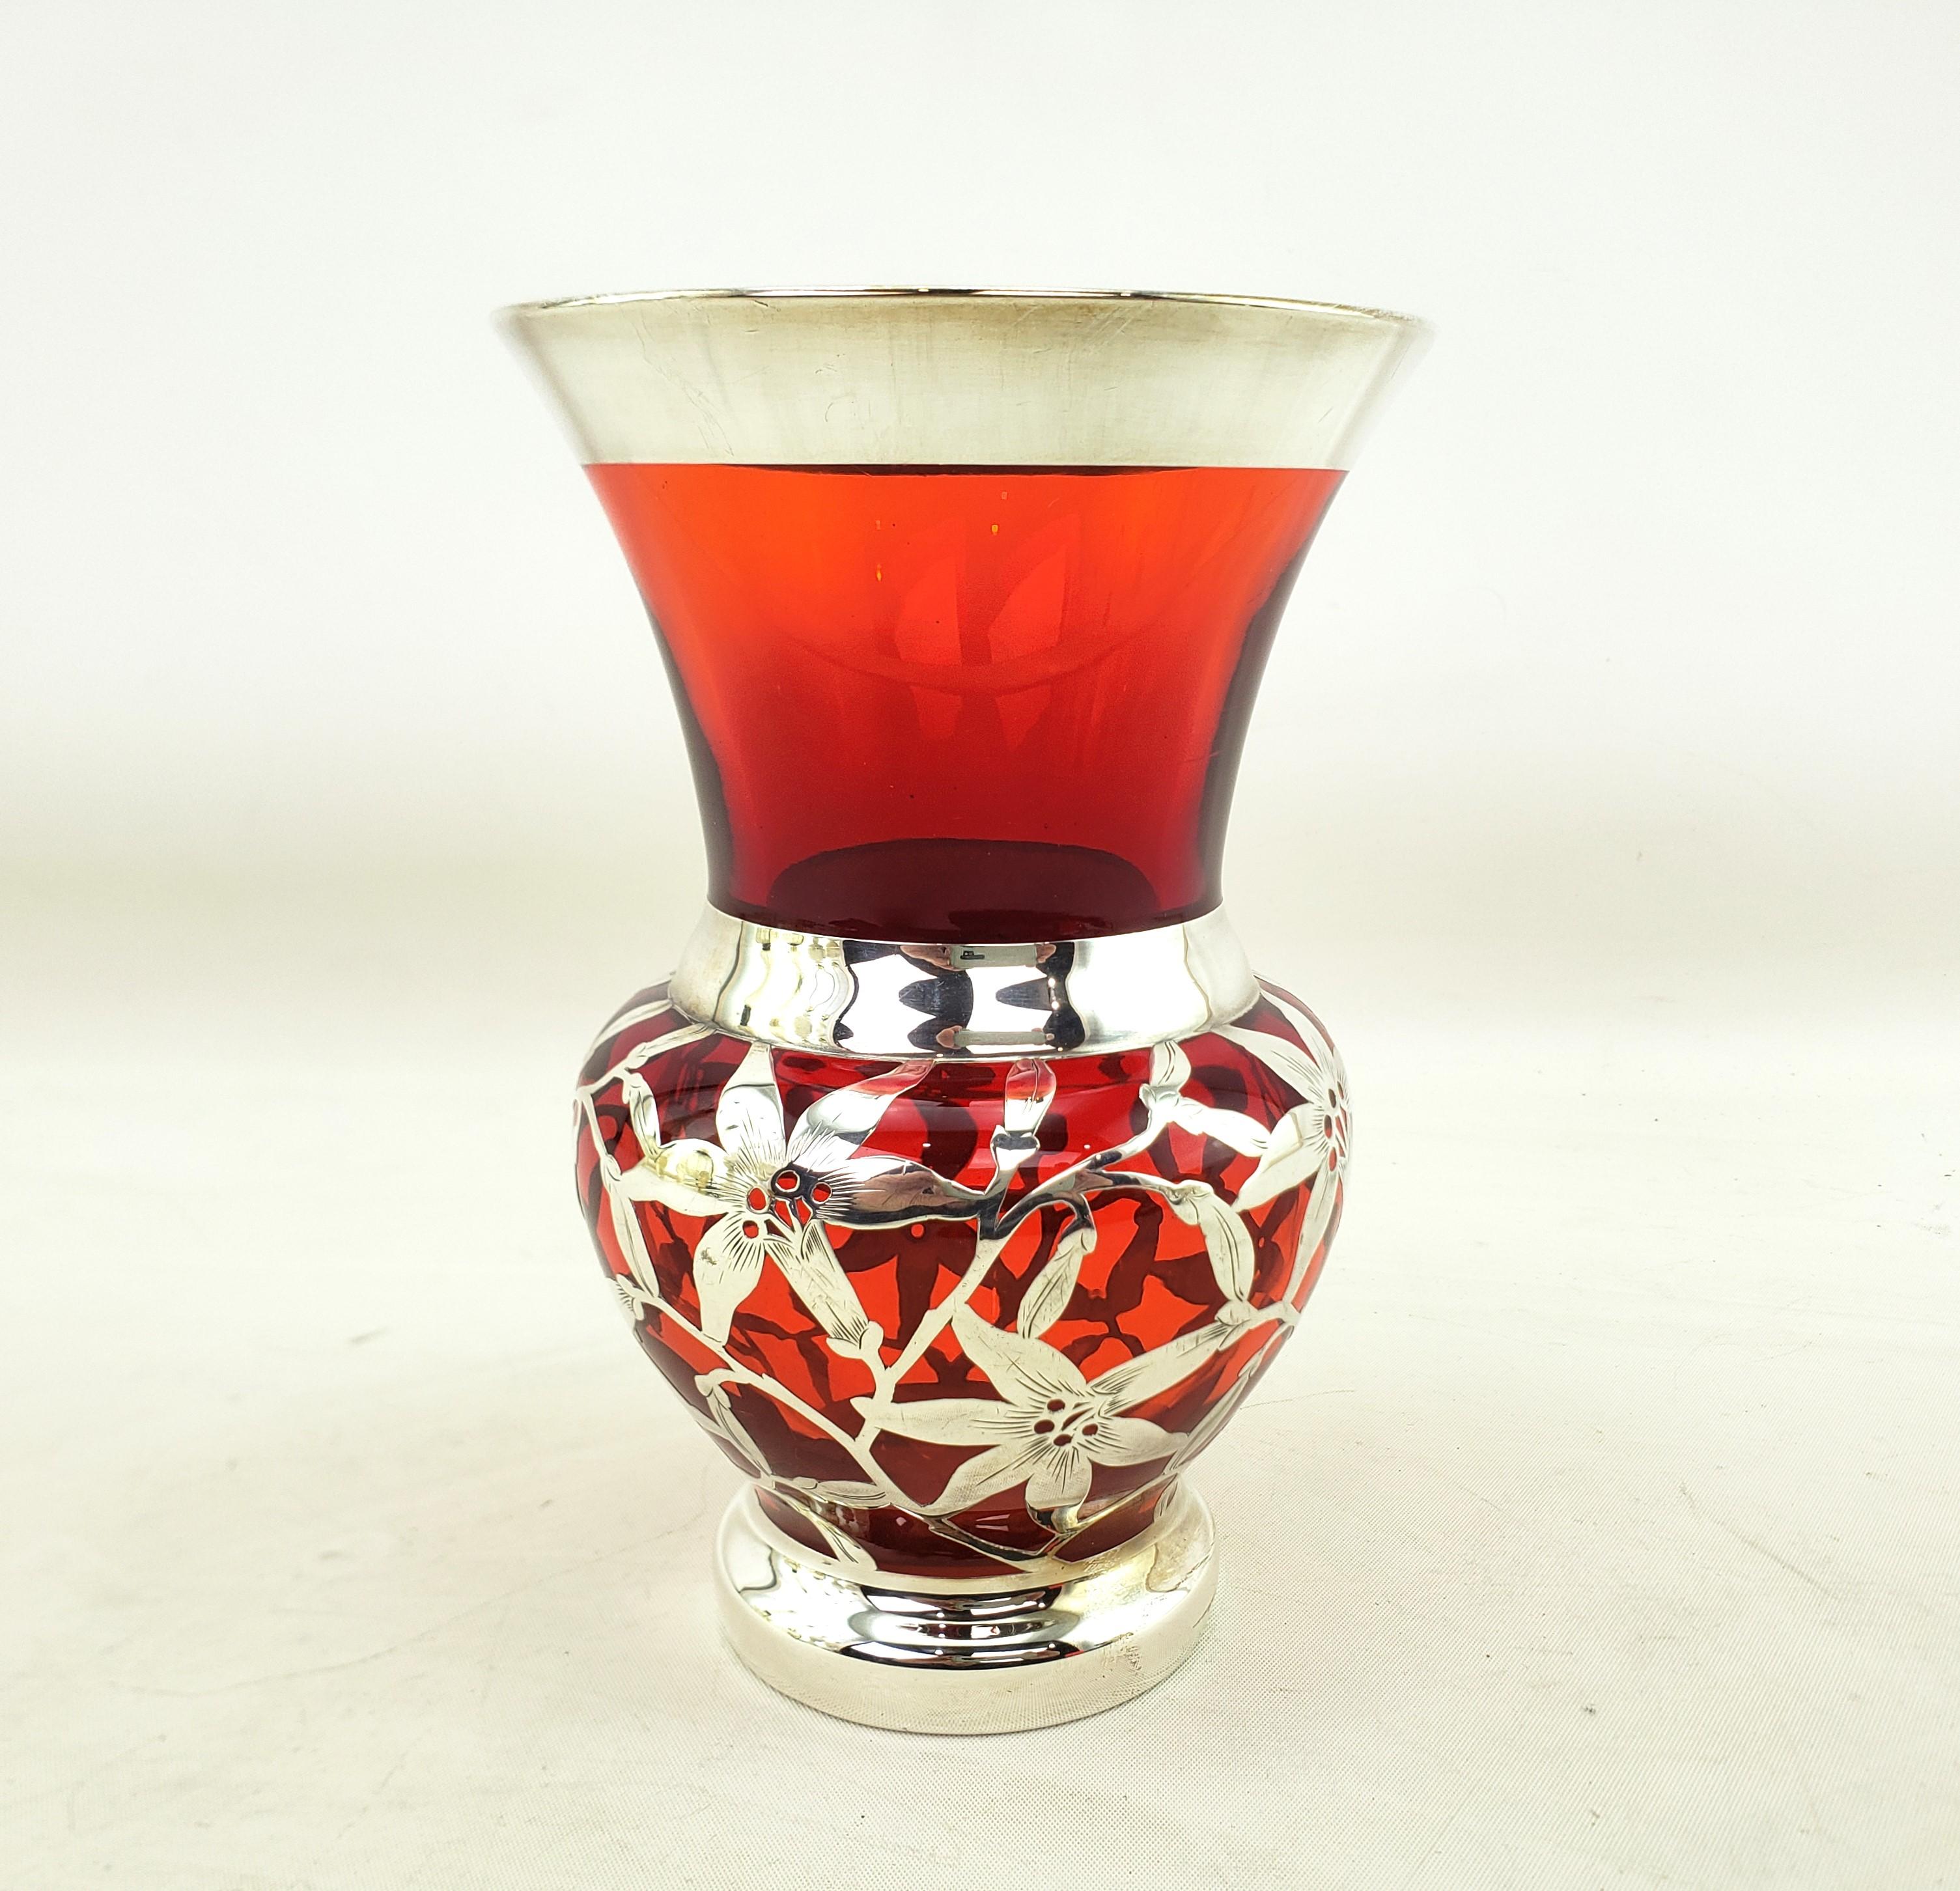 This well executed antique silver overlay vase is unsigned, but presumed to have originated from the United States and date to approximately 1920 and done in an Art Deco style. The vase is done with a thick ruby glass with heavy silver overlay